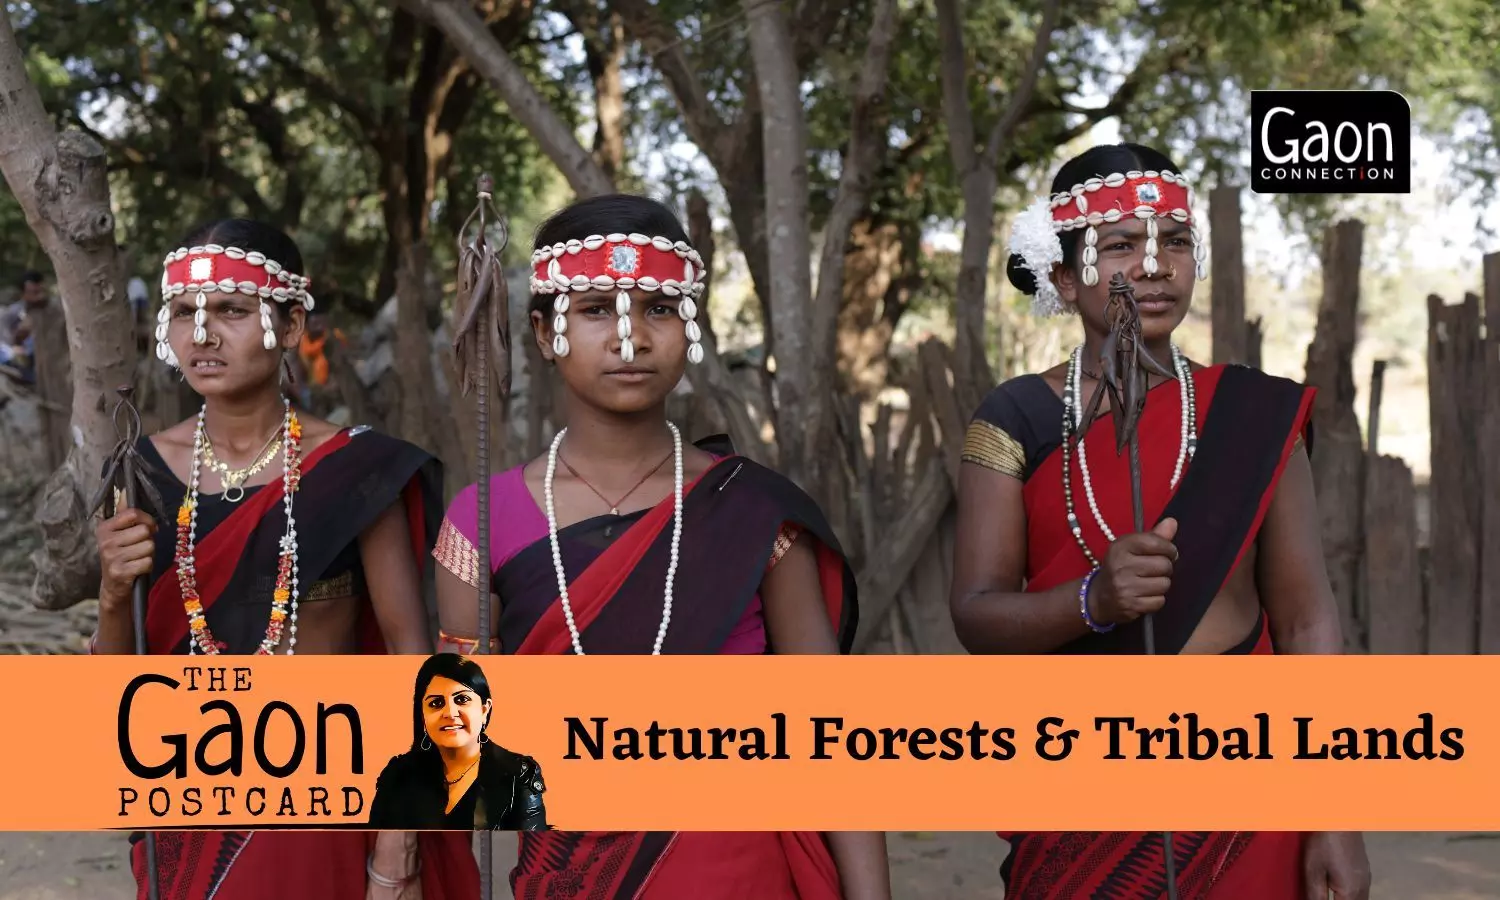 Forests thrive in tribal areas. And that isnt just coincidence.